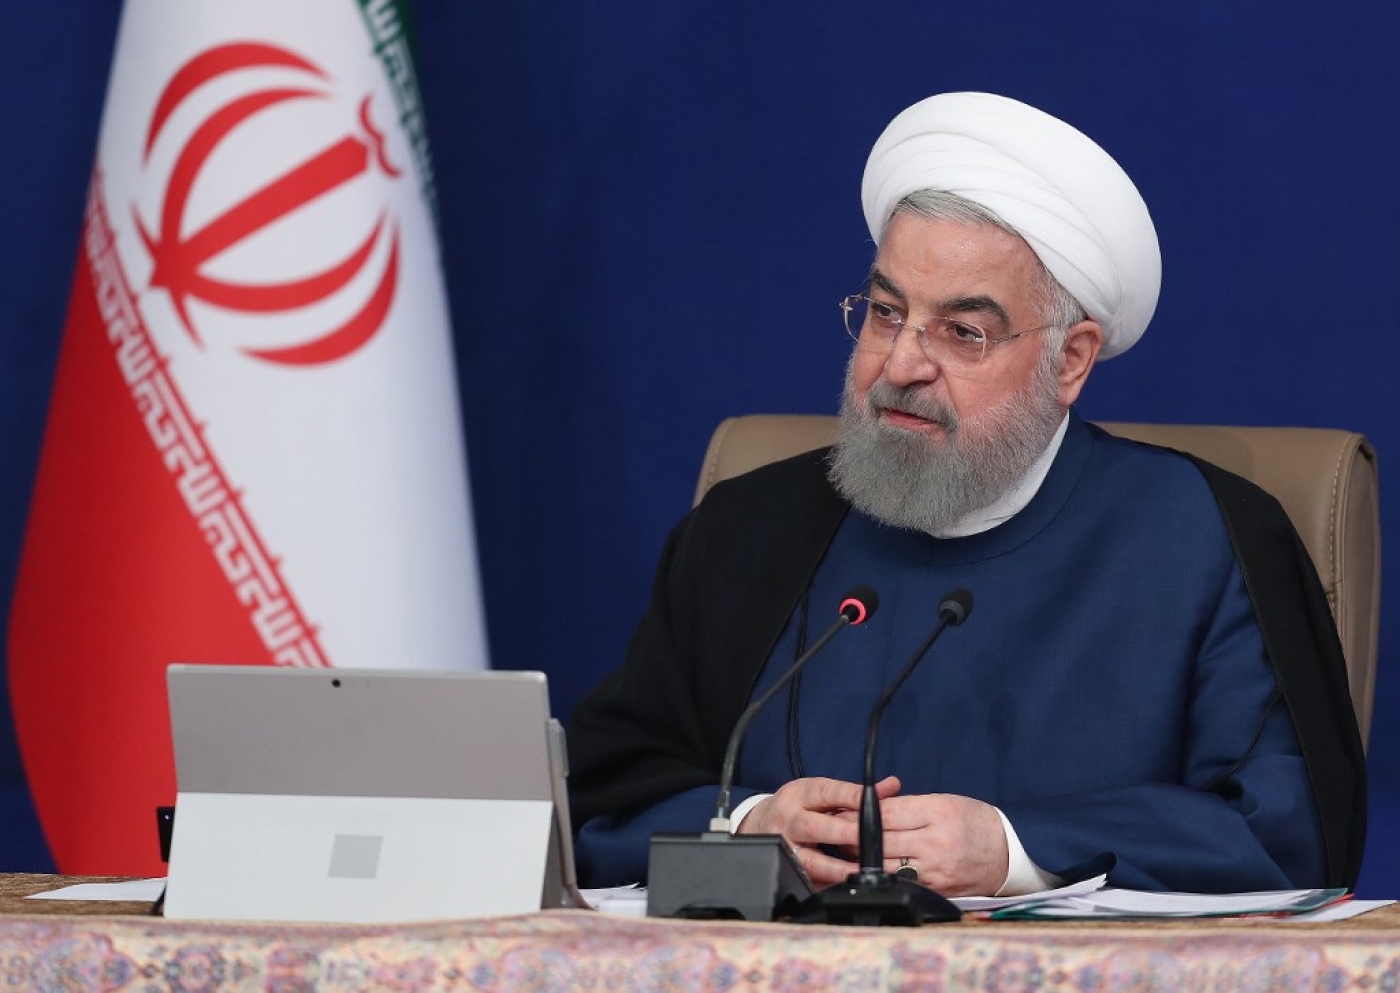 Rouhani delivered a speech on Thursday broadcasted by state television.